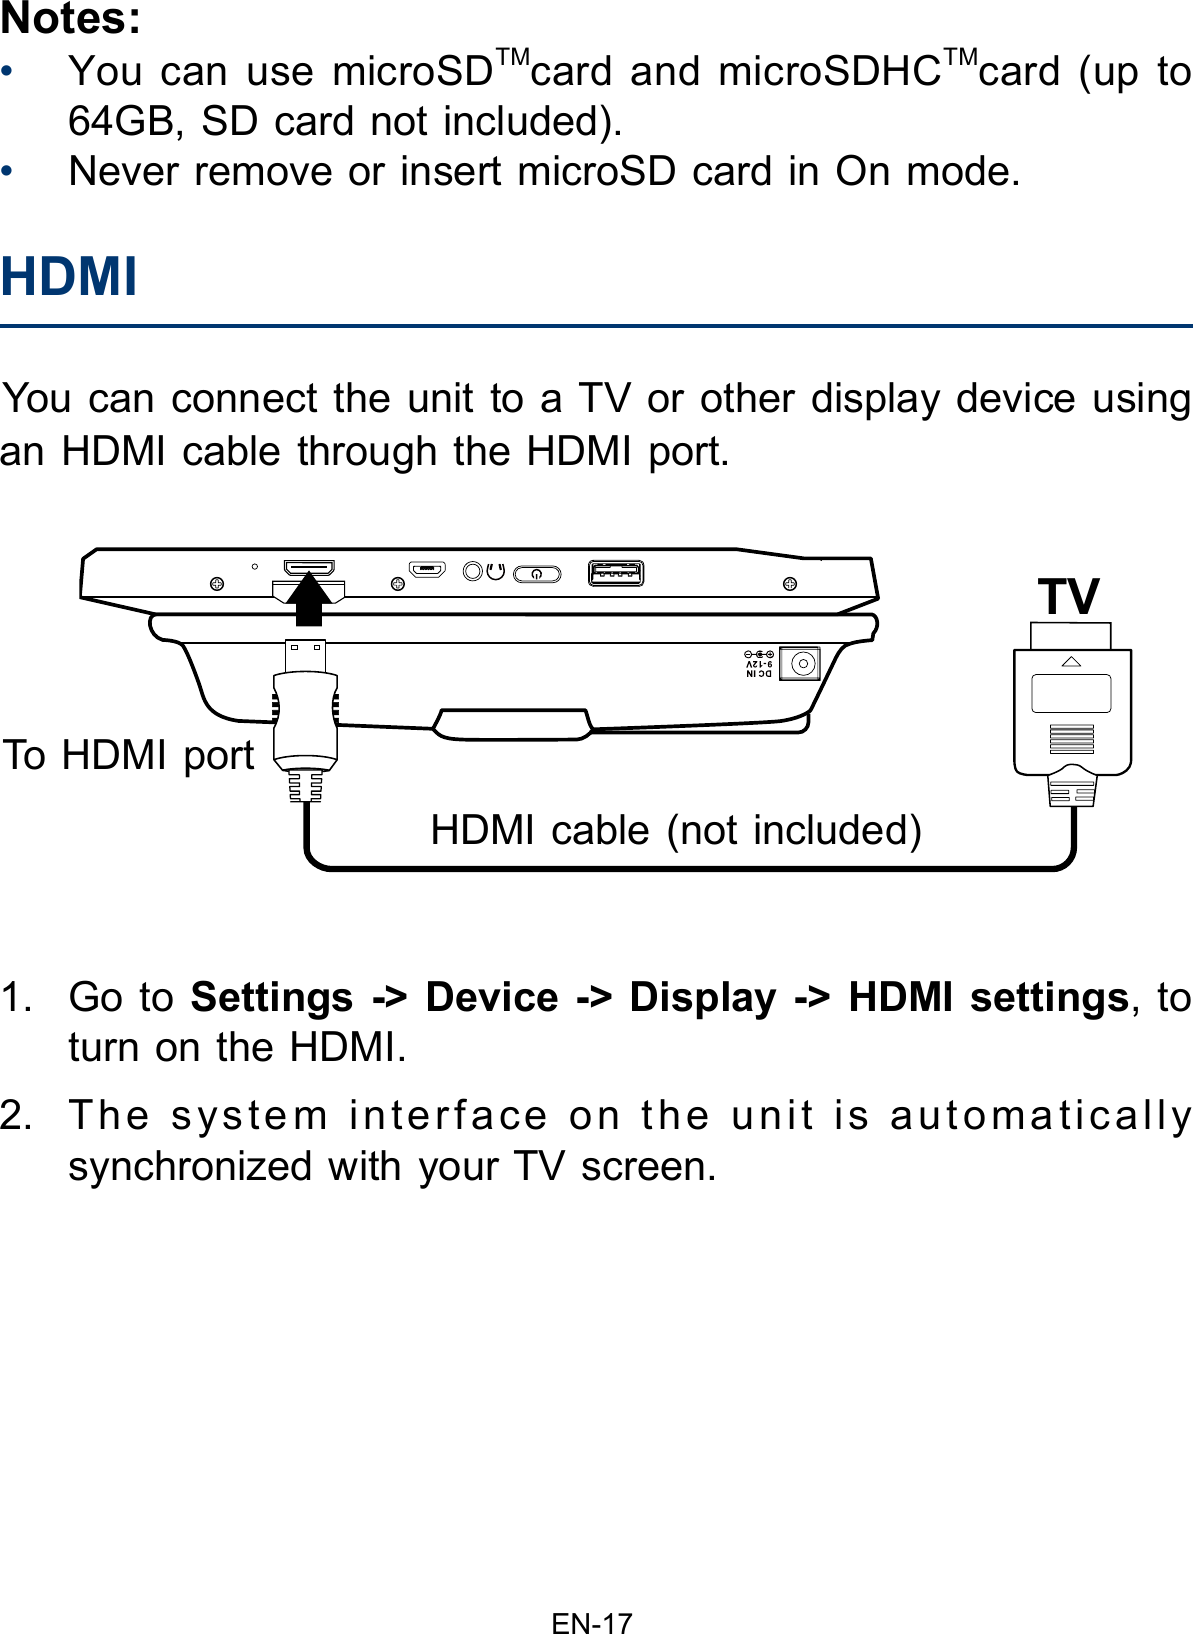 EN-17Notes:•You can use microSDTMcard and microSDHCTMcard (up to64GB, SD card not included).•Never remove or insert microSD card in On mode.You can connect the unit to a TV or other display device using an HDMI cable through the HDMI port. 1. Go to Settings -&gt; Device -&gt; Display -&gt; HDMI settings, toturn on the HDMI.2. The system interface on the unit is automaticallysynchronized with your TV screen.HDMI  To HDMI portHDMI cable (not included) TV